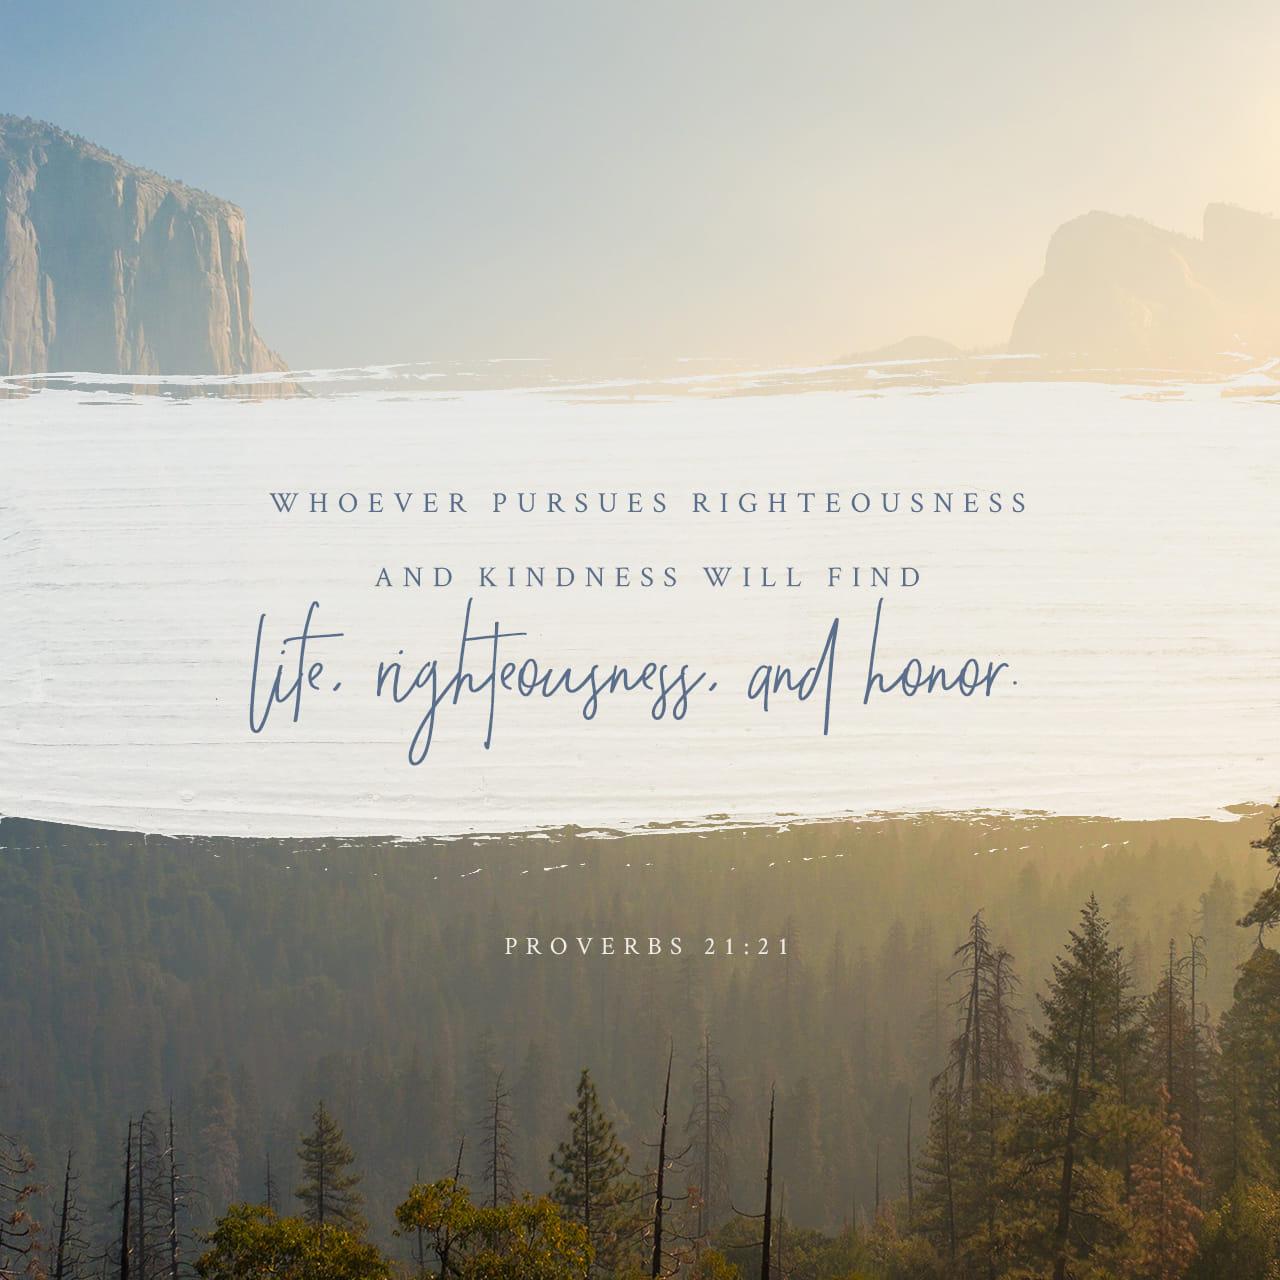 Bible Verse of the Day - day 91 - image 13750 (Proverbs 21:21-22)